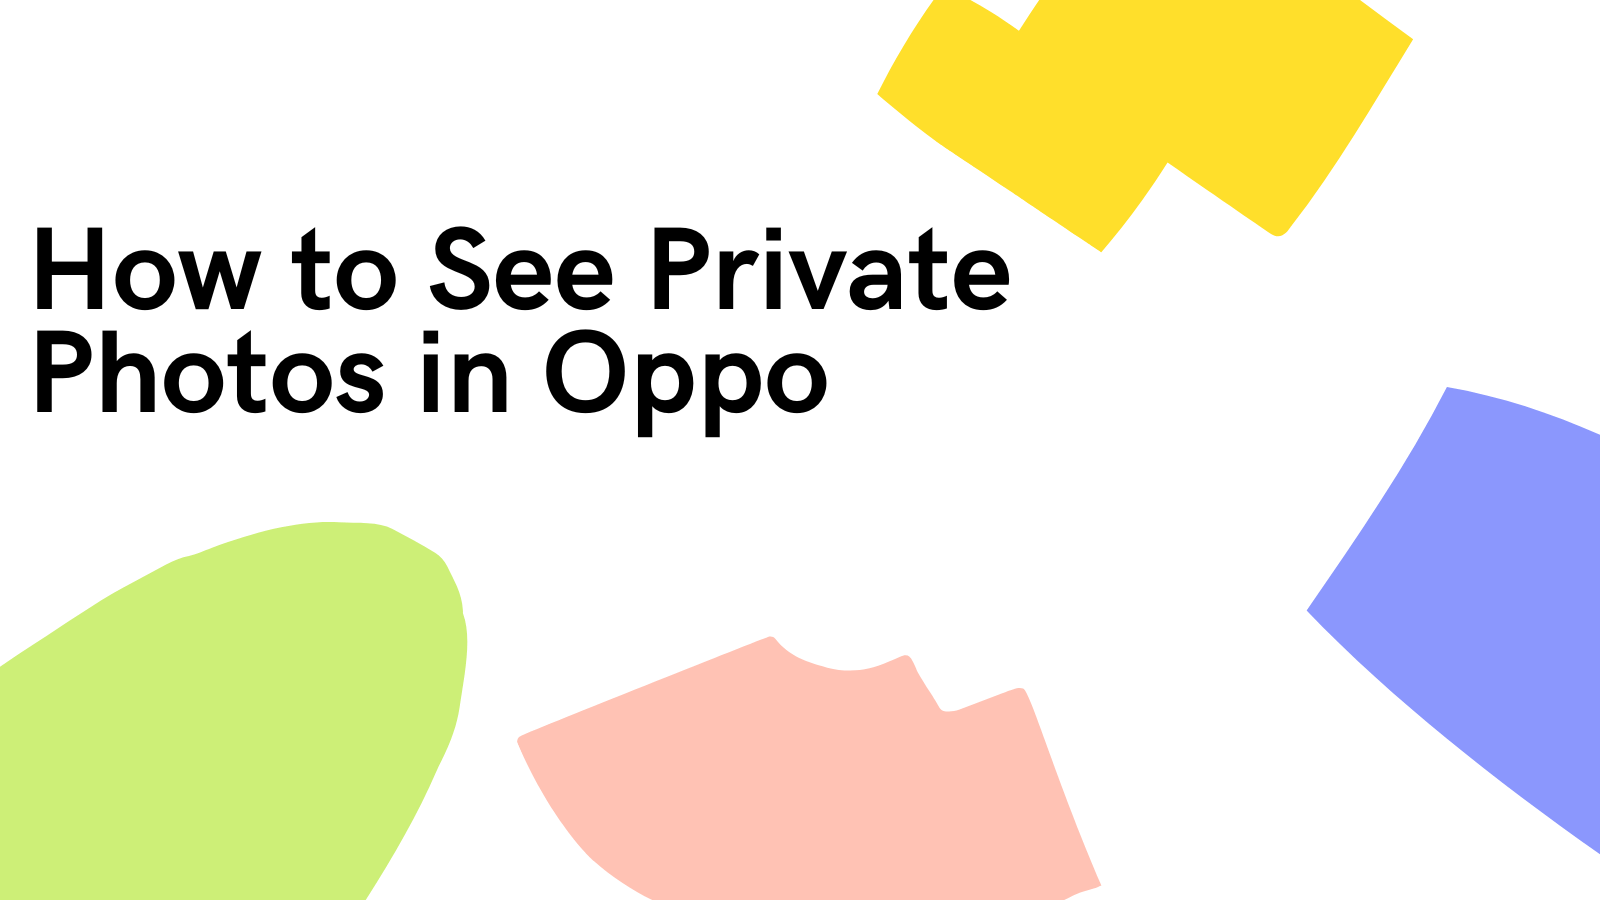 How to See Private Photos in Oppo